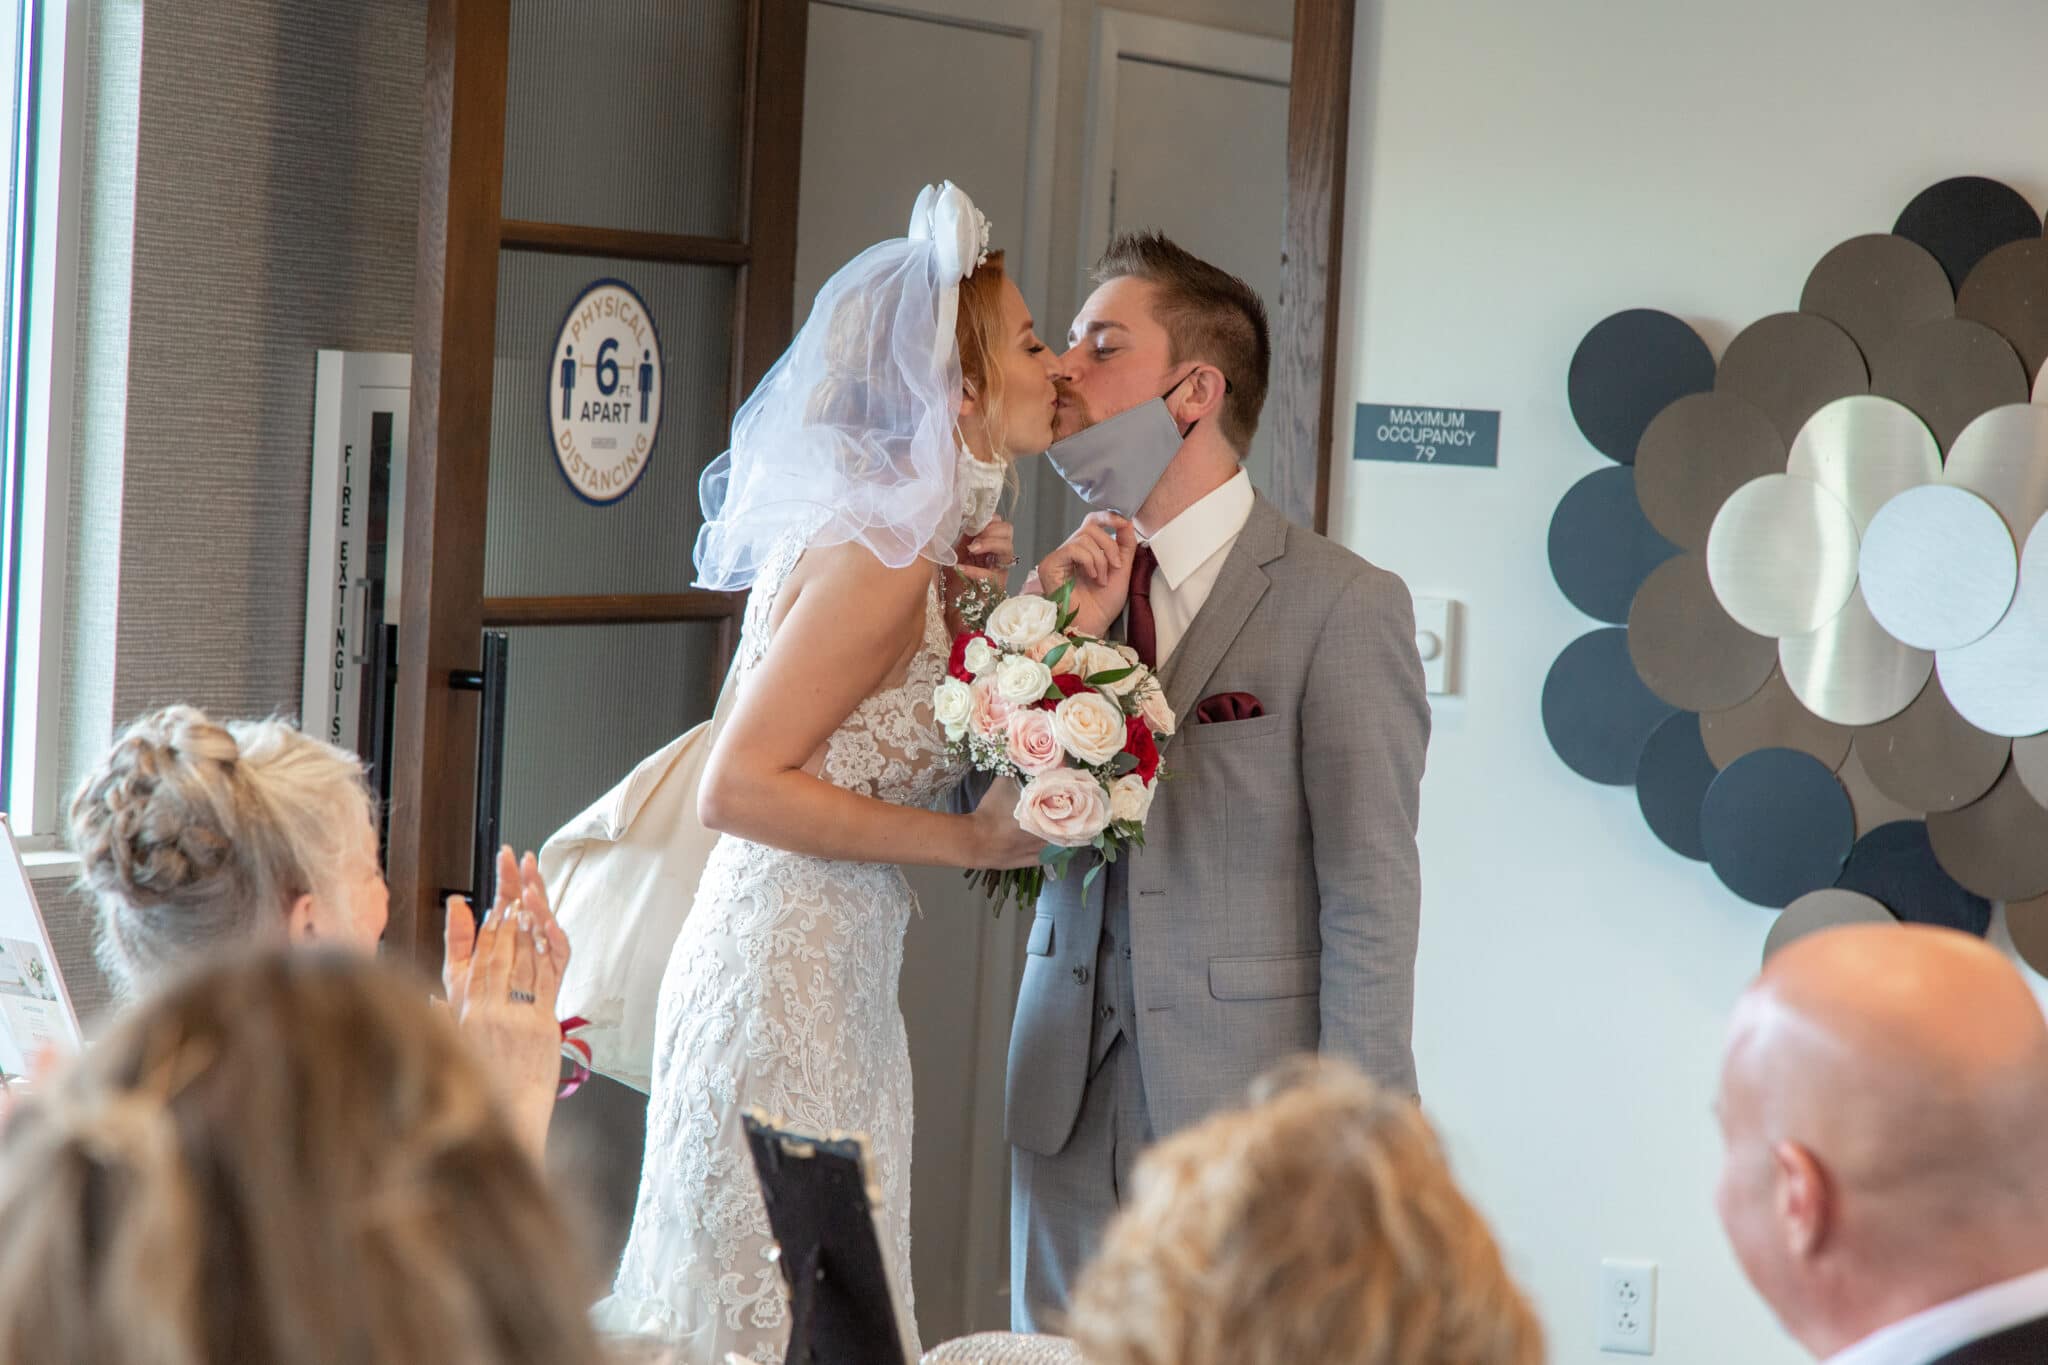 bride and groom remove masks once entering their wedding reception space to kiss while bride holds bouquet